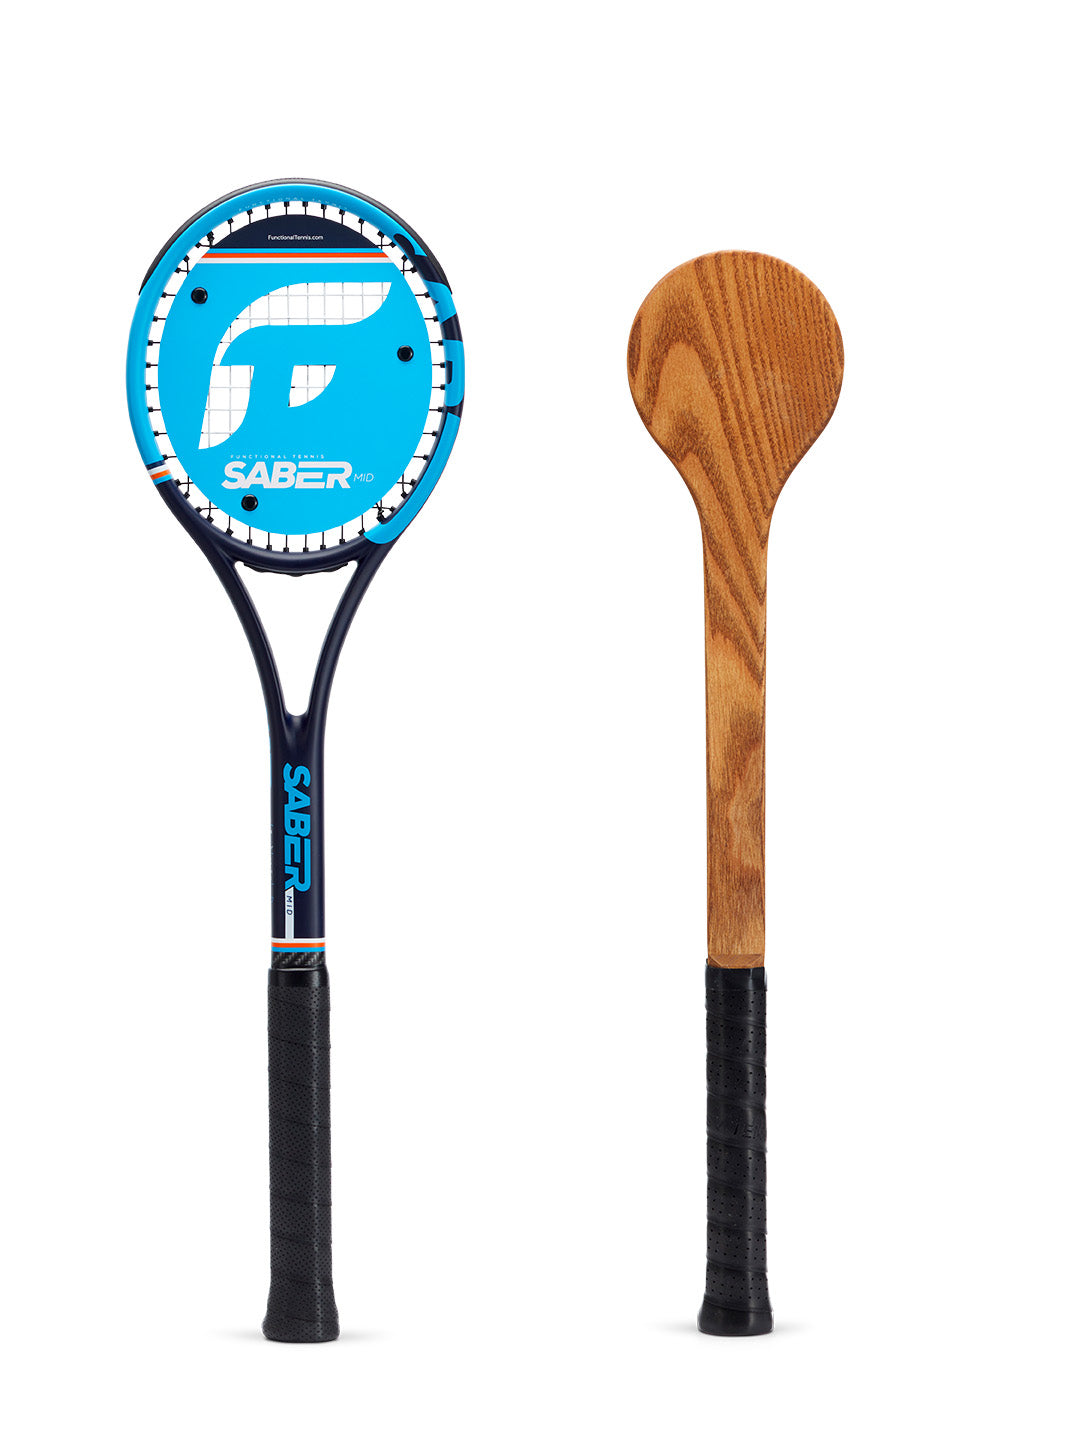 sweetspot Precesion set - Functional tennis saber and the functional tennis pointer